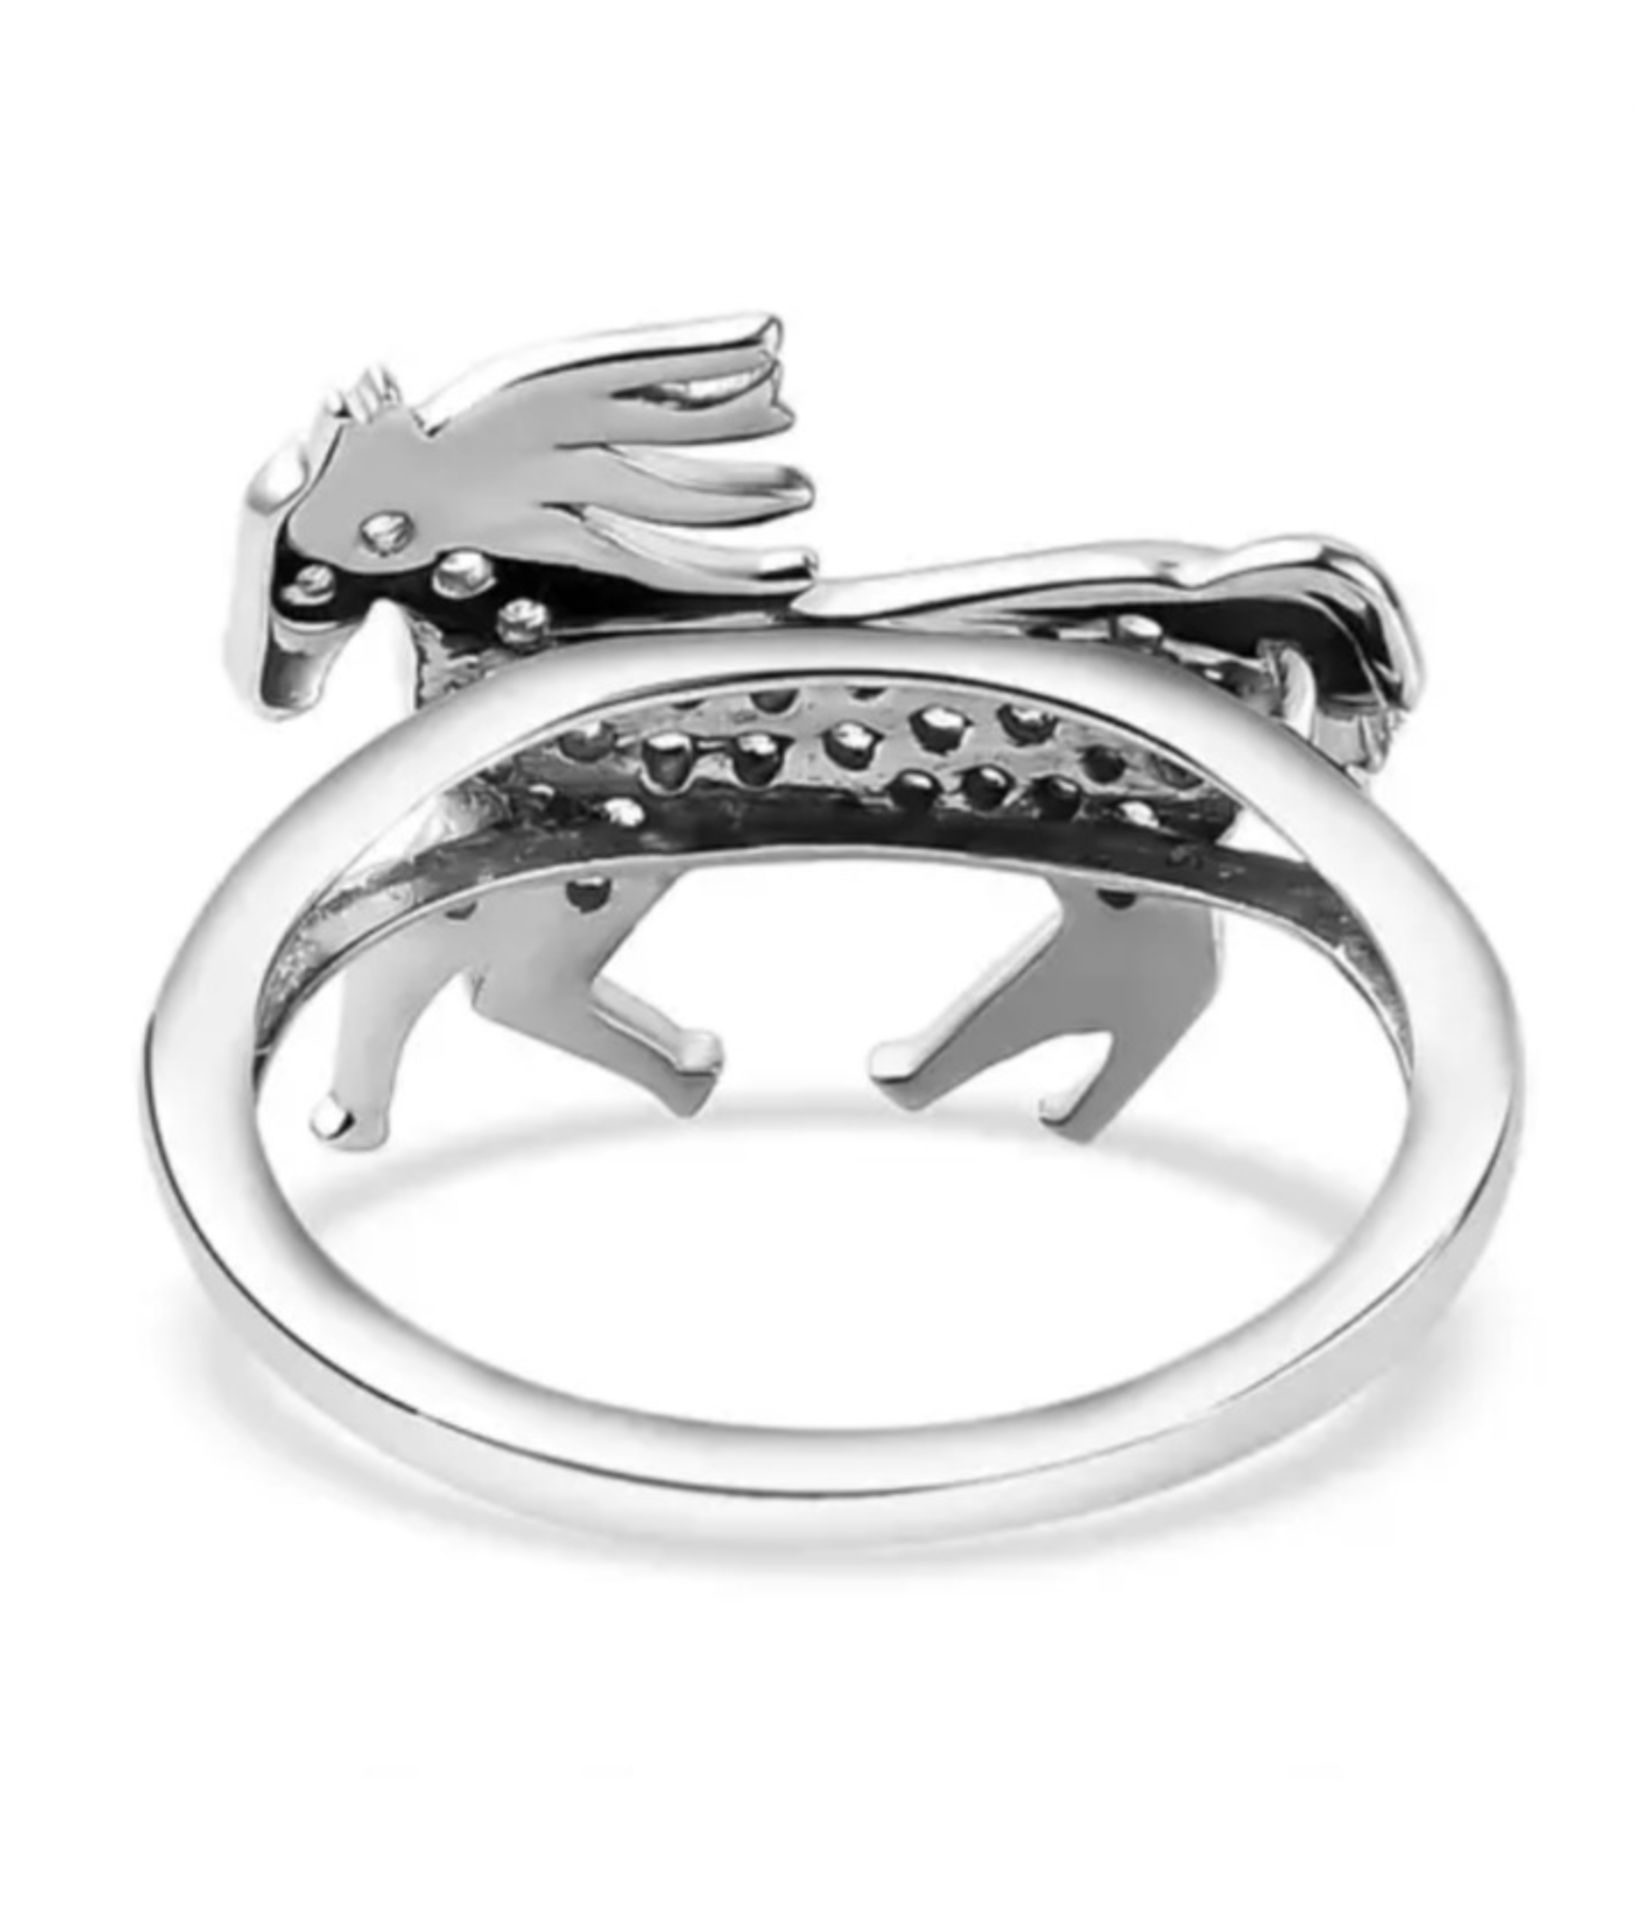 New! Elanza Simulated CZ Unicorn Ring In Platinum Overlay Sterling Silver - Image 4 of 4